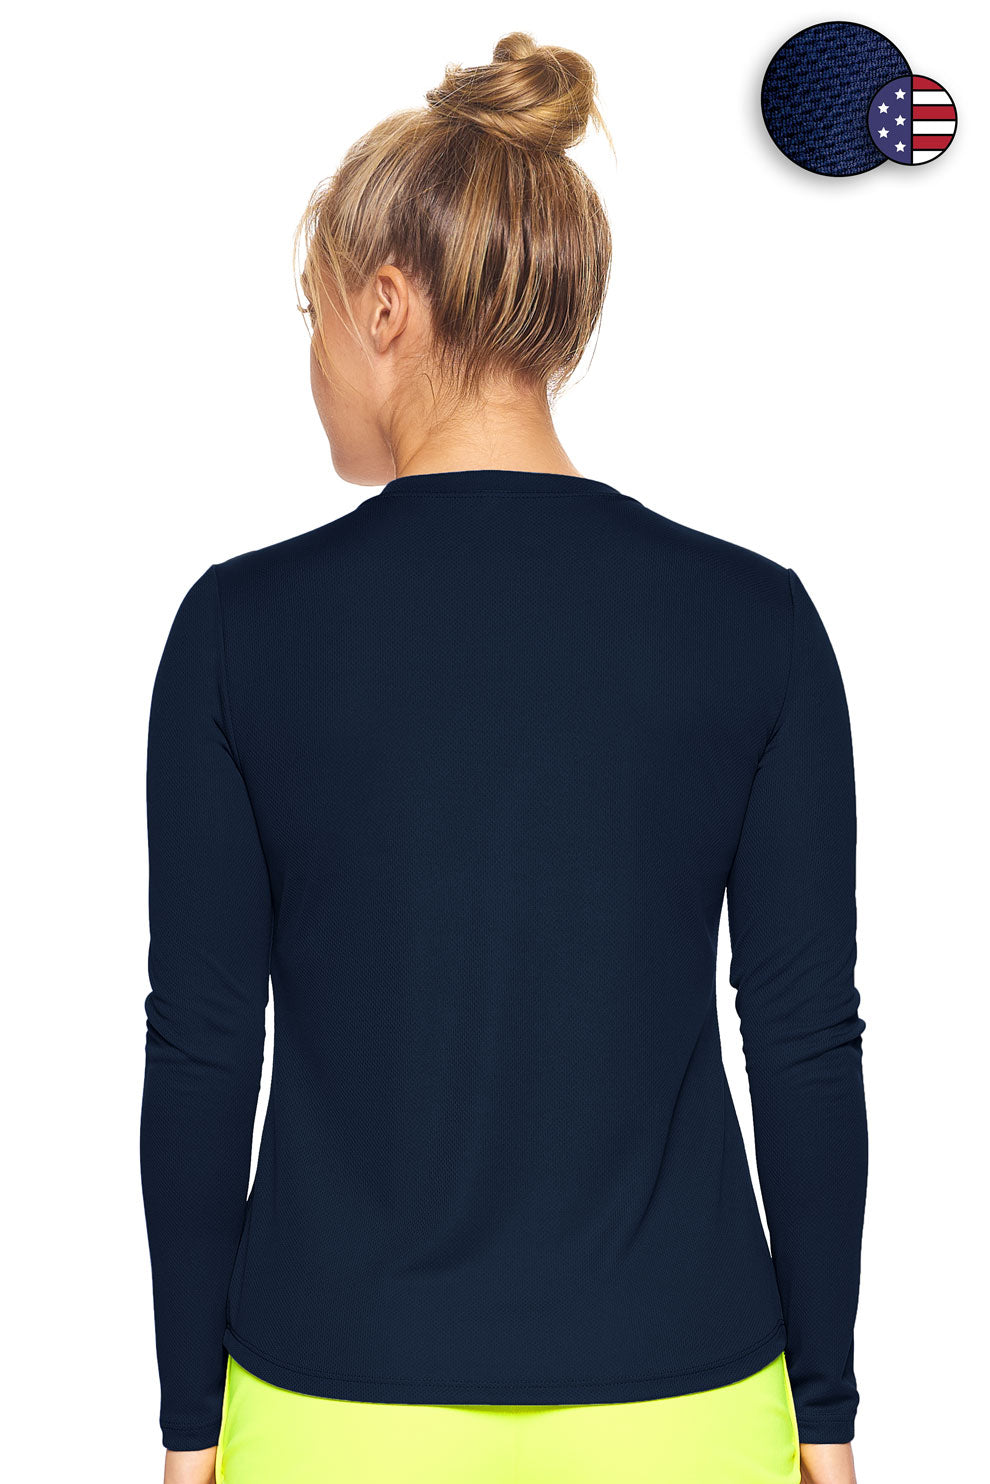 Expert Brand Wholesale Women's Oxymesh Crewneck Performance Tee Made in USA AJ301D Navy image 3#navy